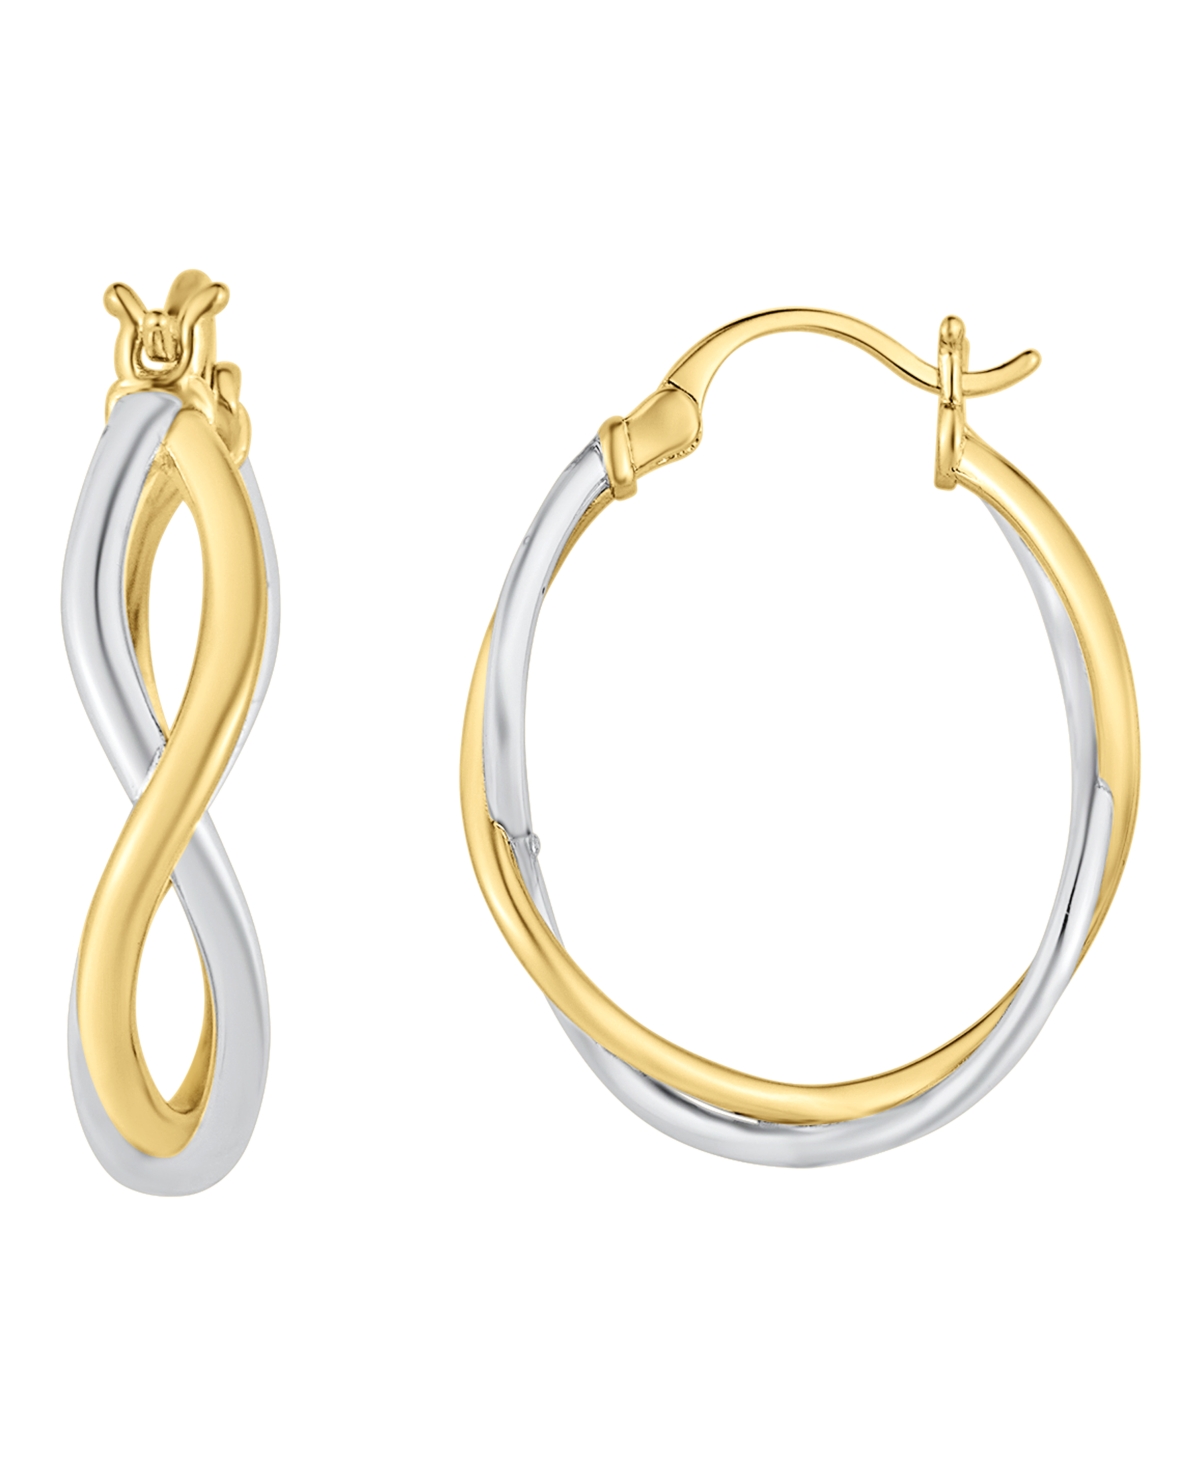 And Now This Two-tone Woven Hoop Earring In Silver And Gold